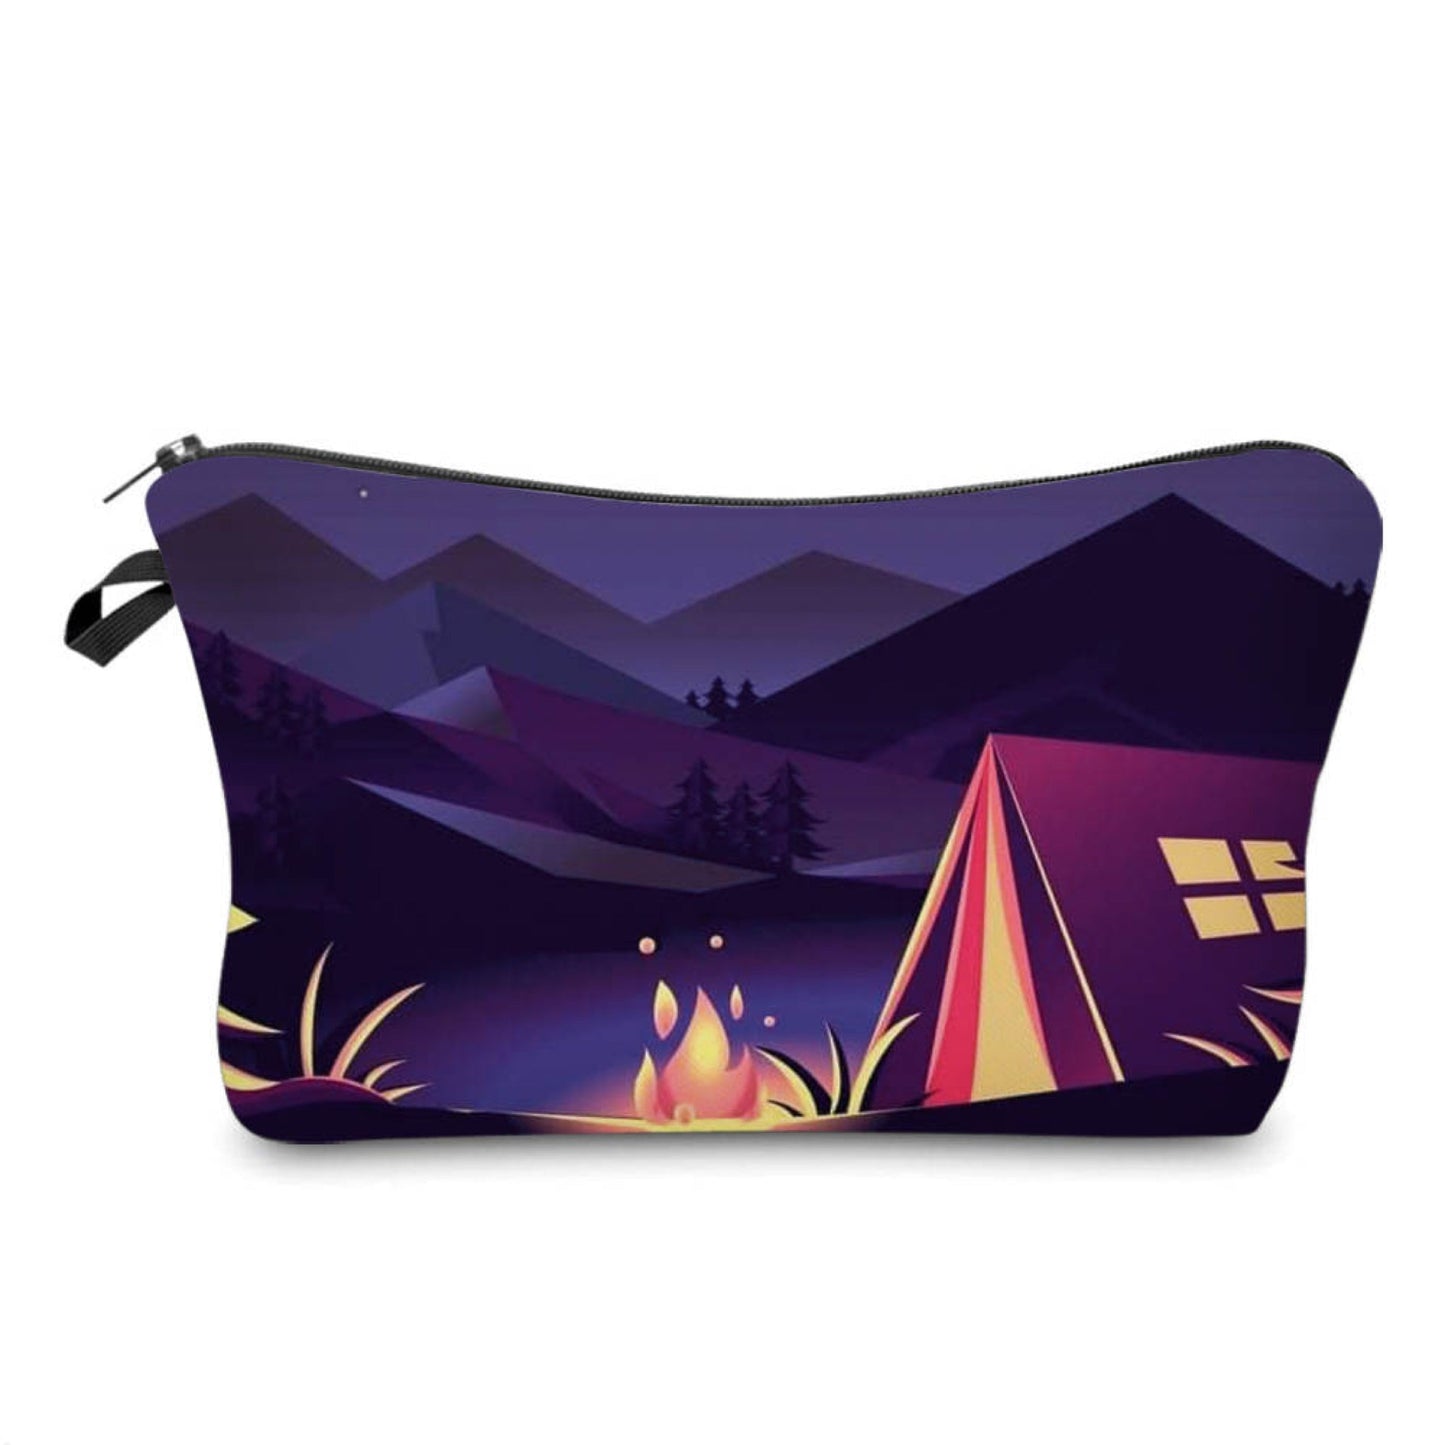 Fire & Tent - Water-Resistant Multi-Use Pouch